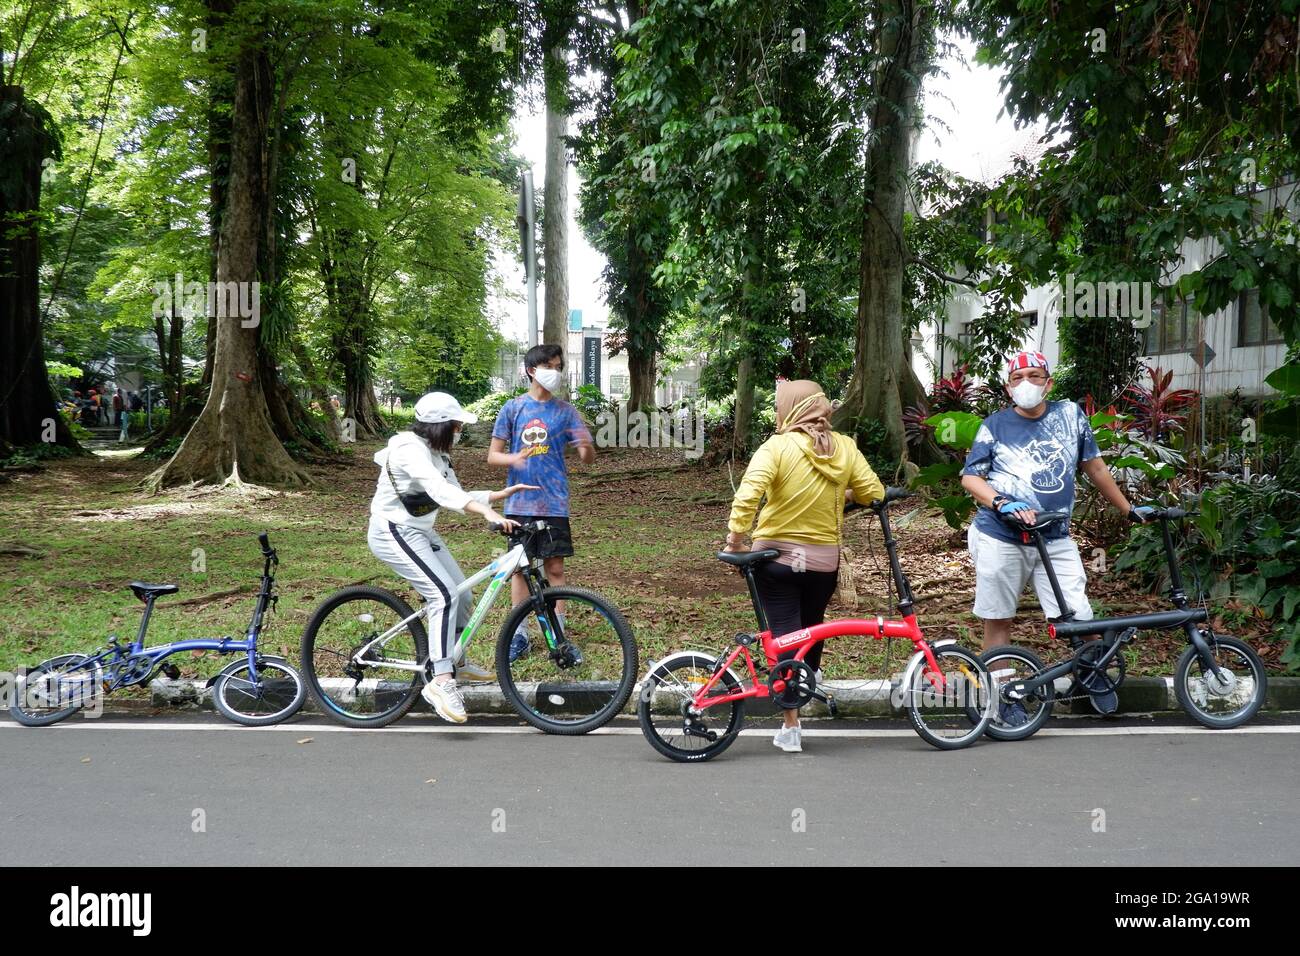 A family with facemask and bikes rest on street side. Stock Photo